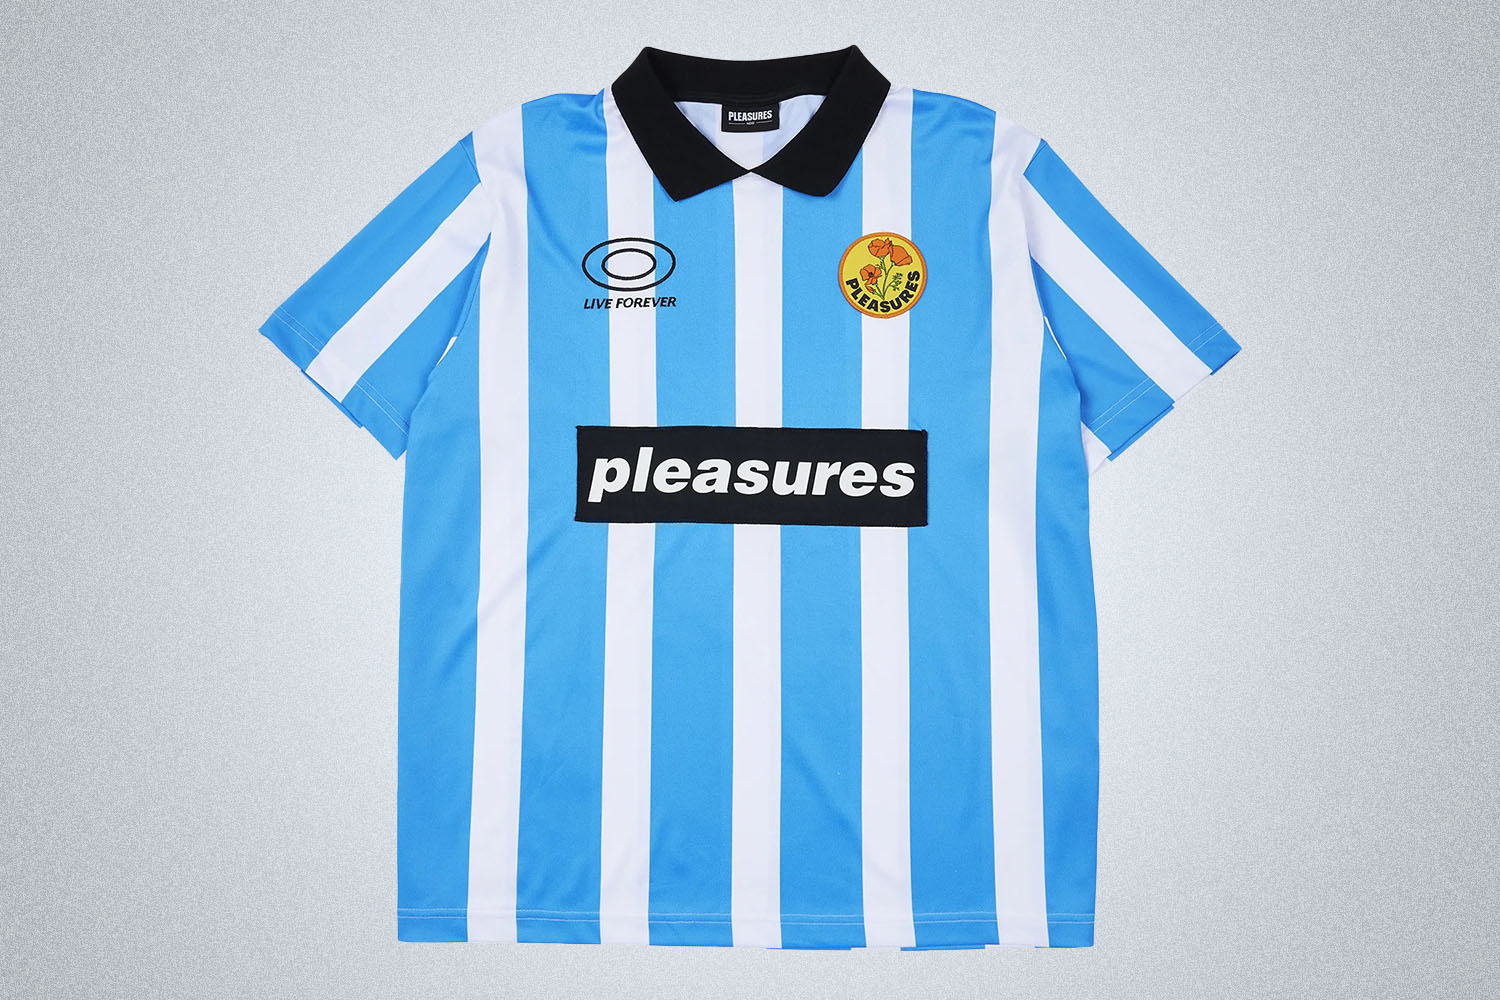 a light blue and white vertical striped soccer jersey from Pleasures on a grey background